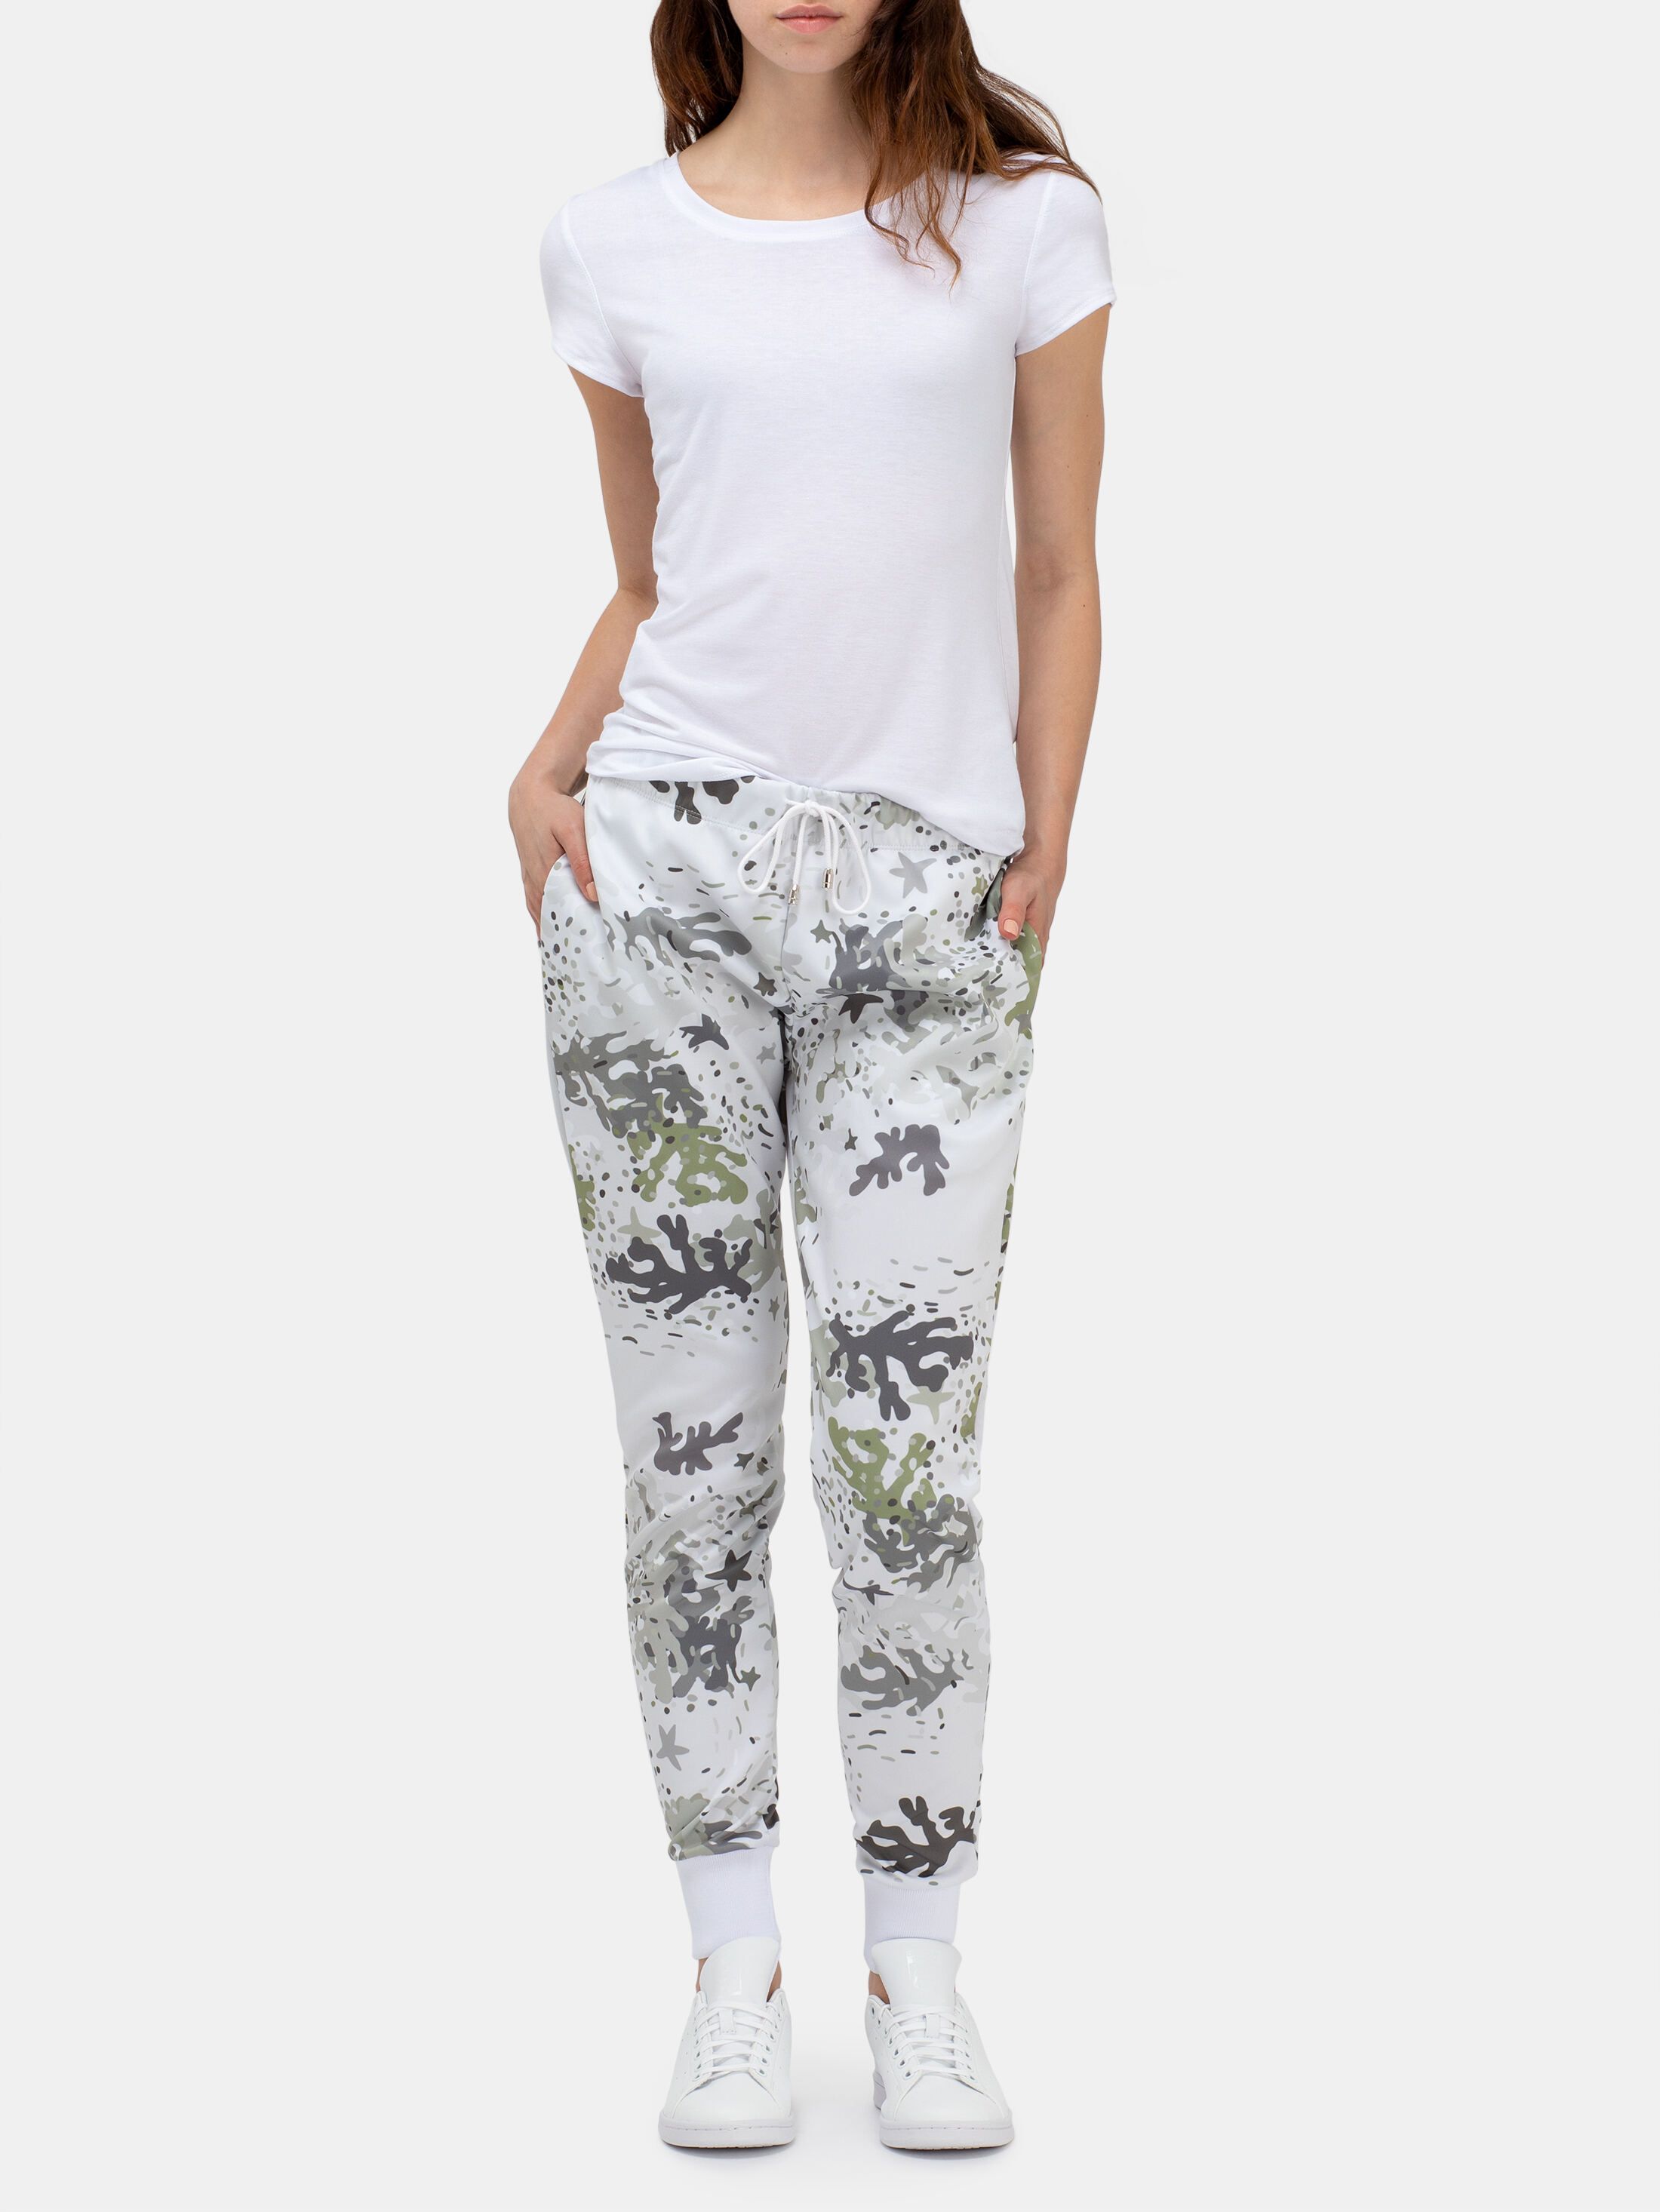 printed jogger pants with your design